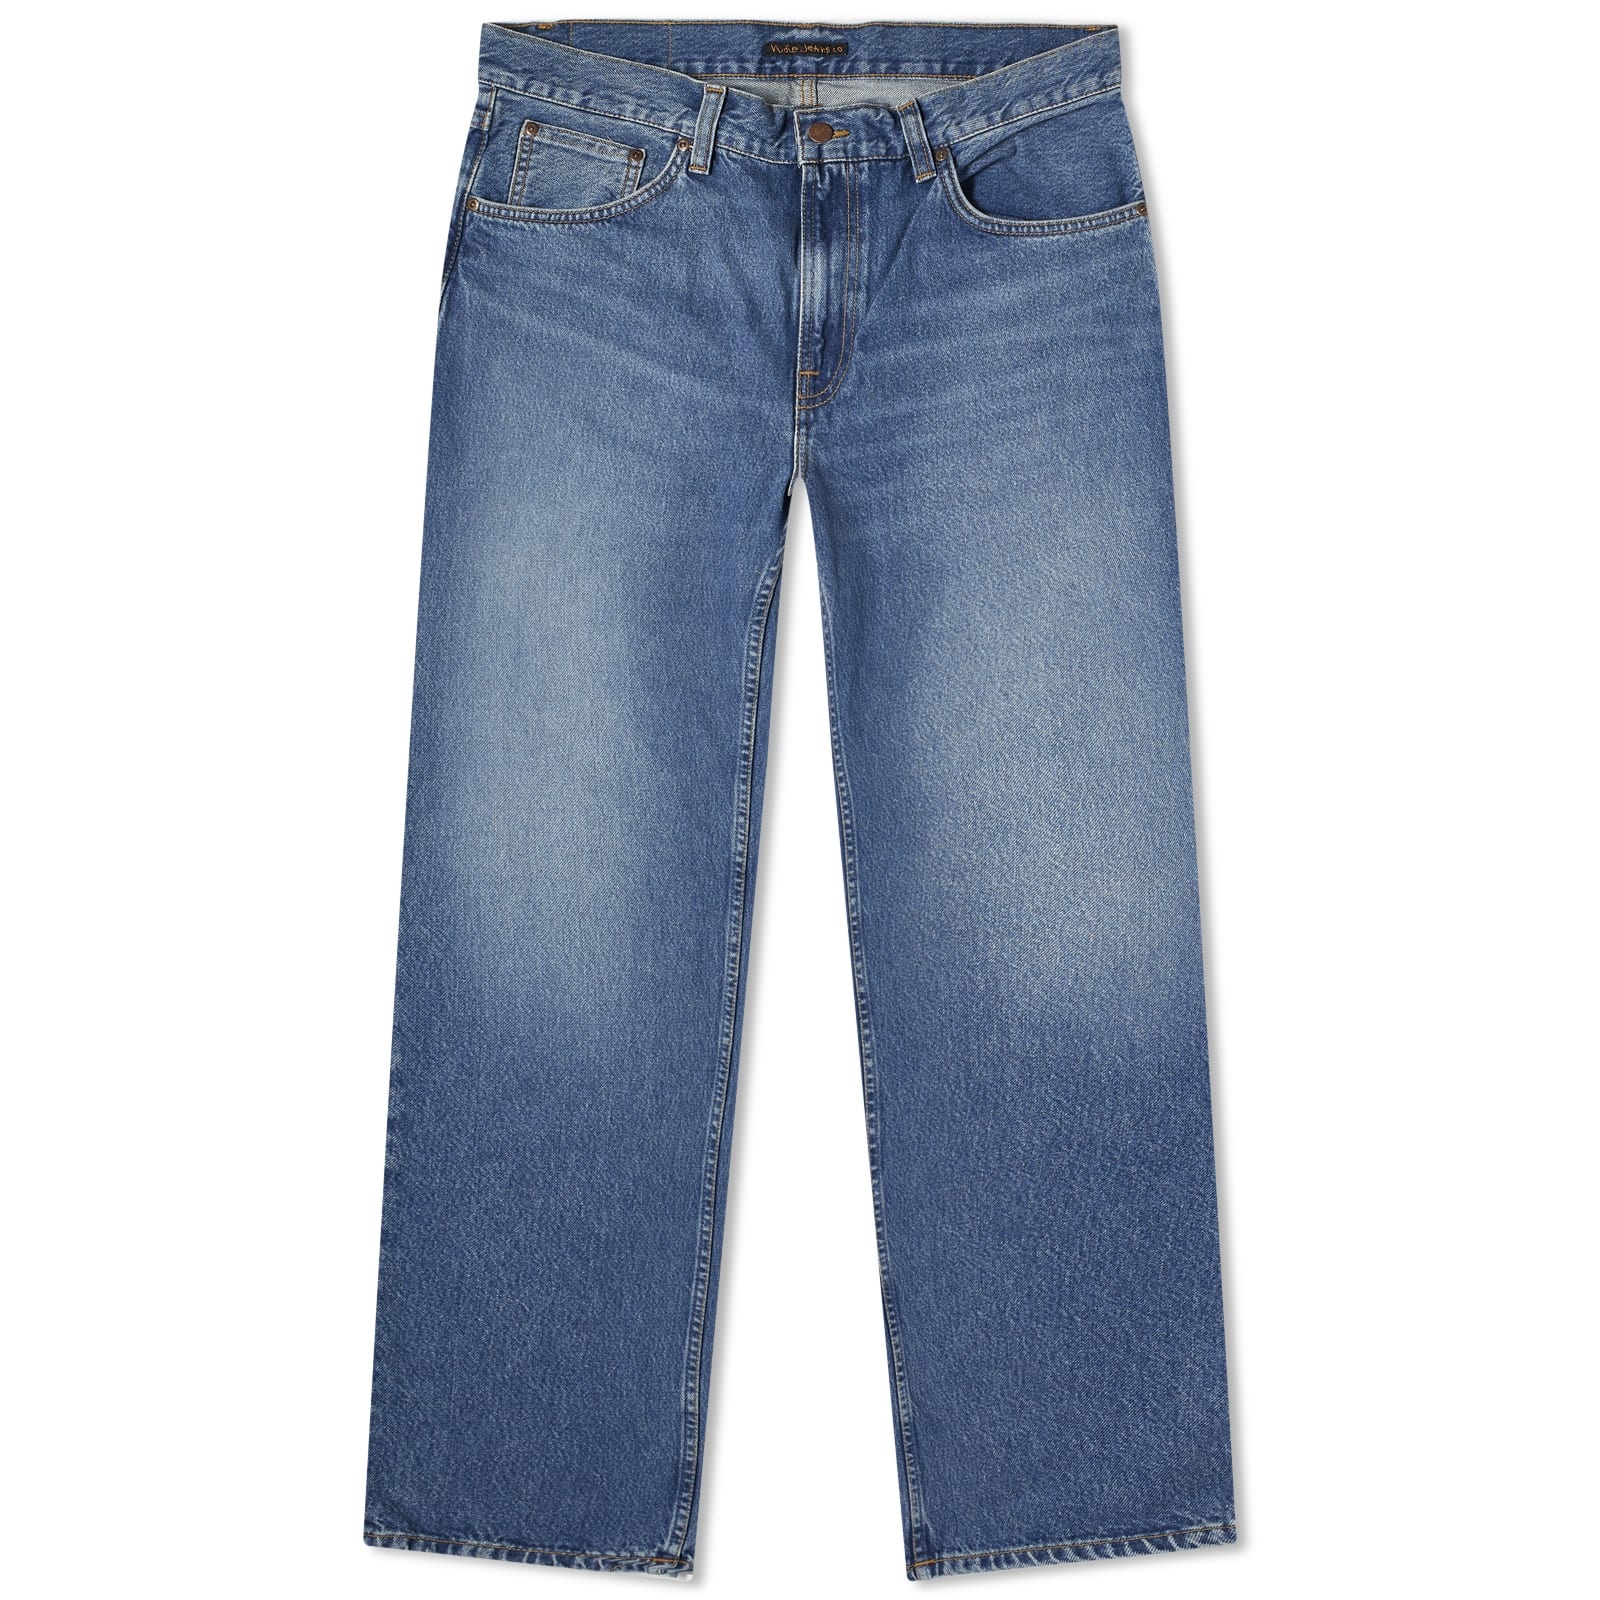 Nudie Jeans Co Gritty Jackson Jeans - 1